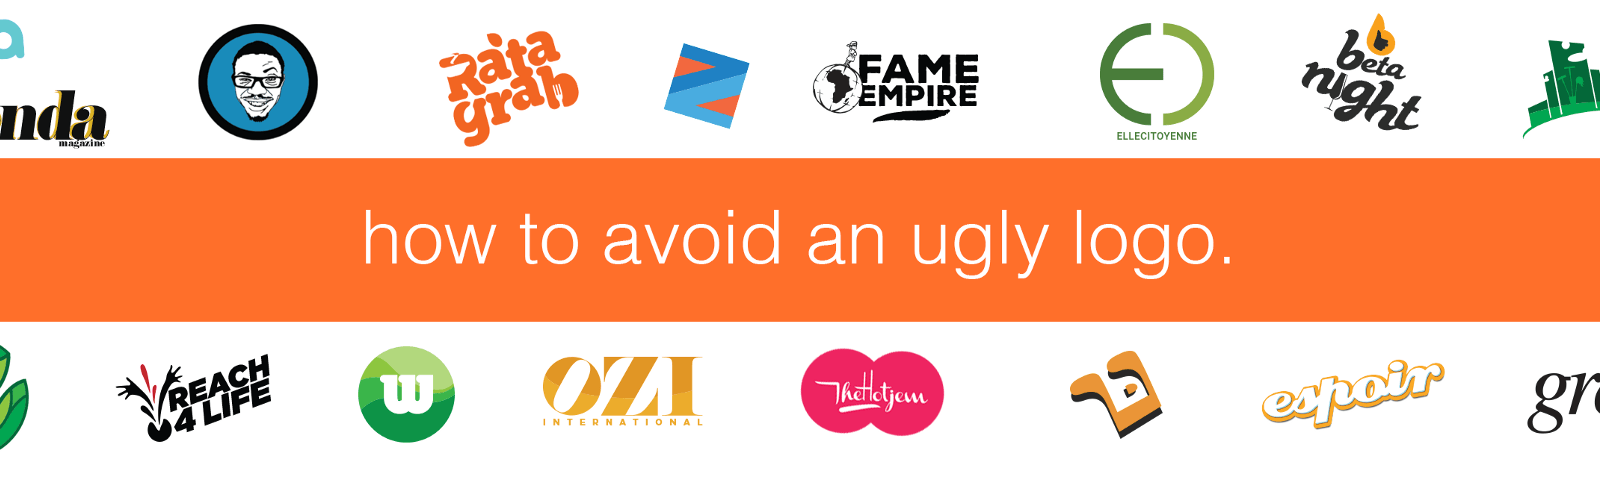 Ugly Logo - How to easily avoid an ugly logo for your business.